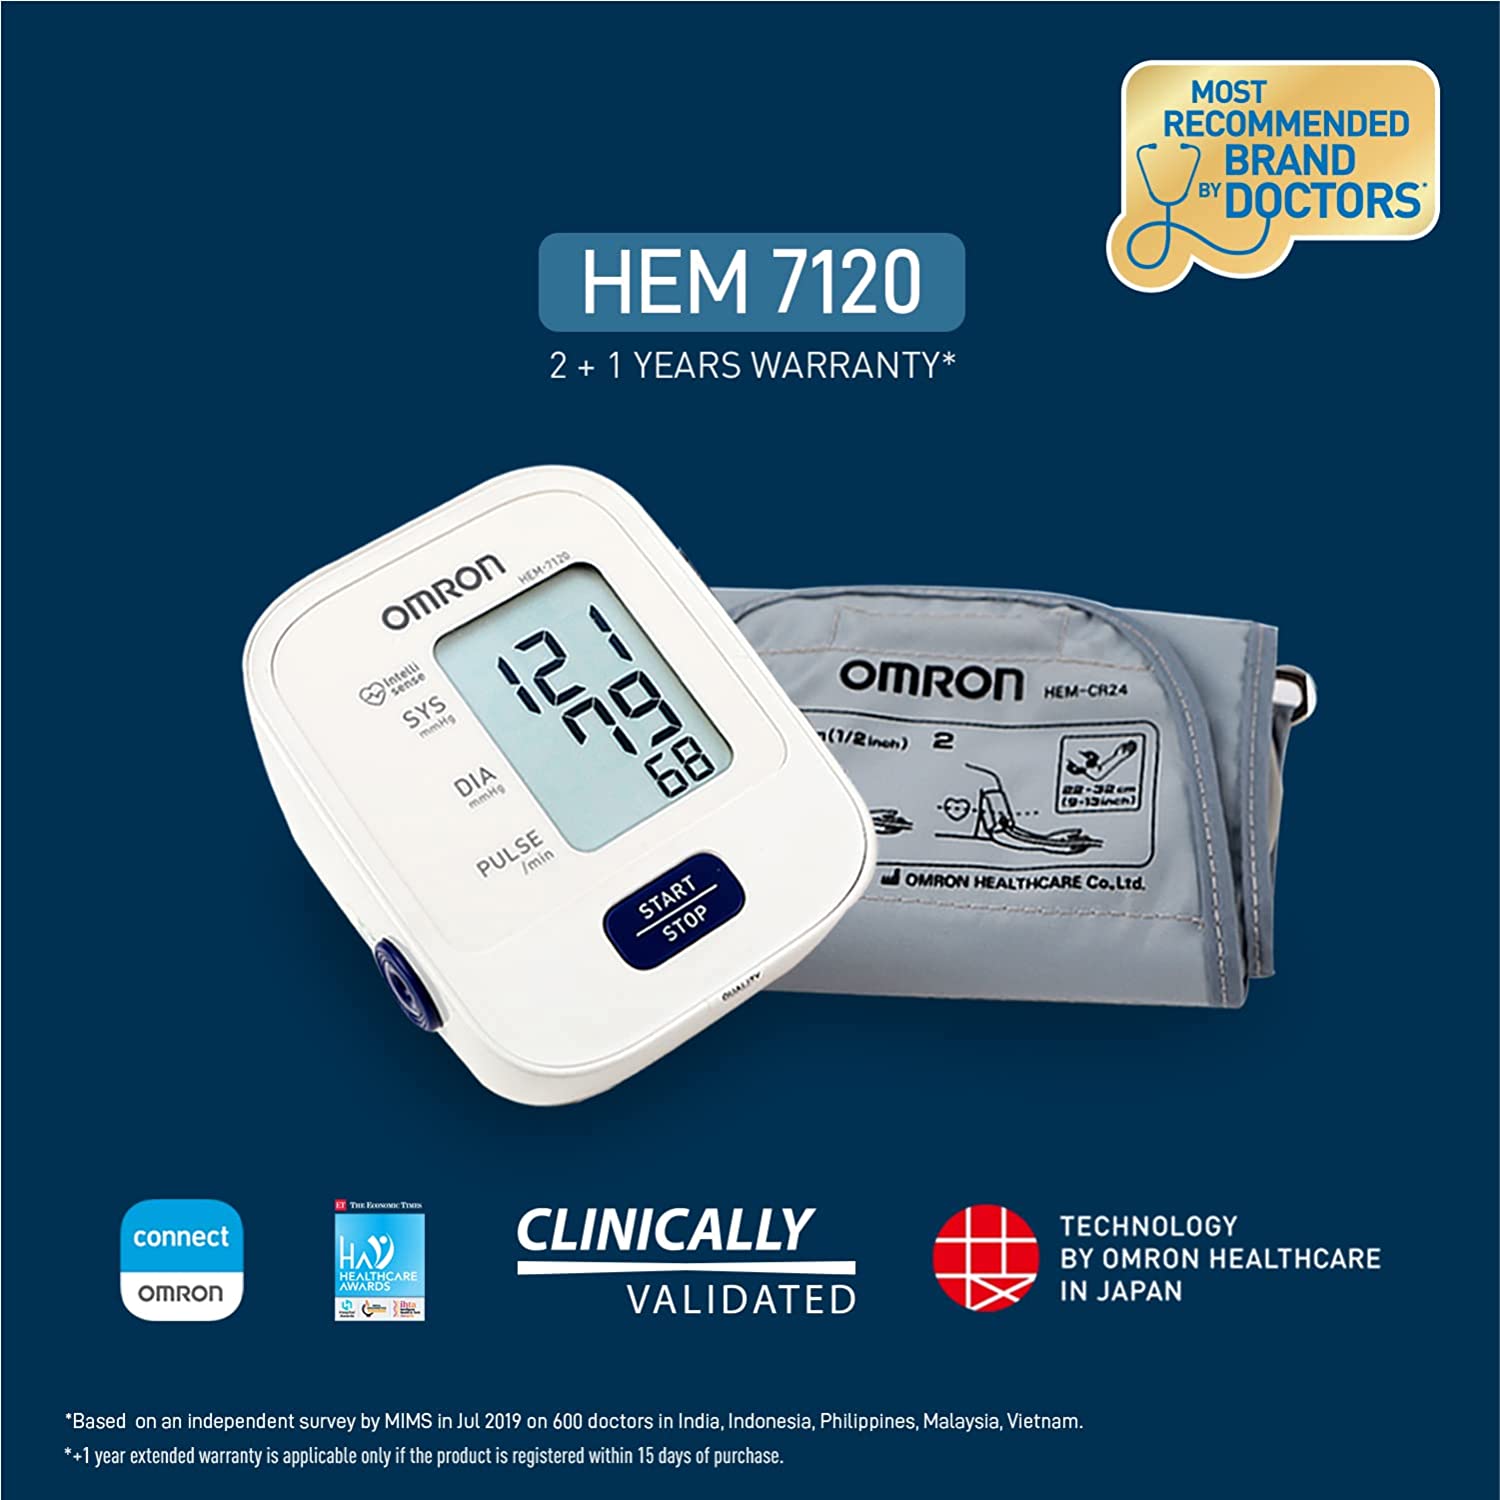 Omron HEM 7120 Fully Automatic Digital Blood Pressure Monitor With Intellisense Technology For Most Accurate Measurement - Arm Circumference (22-32Cm)